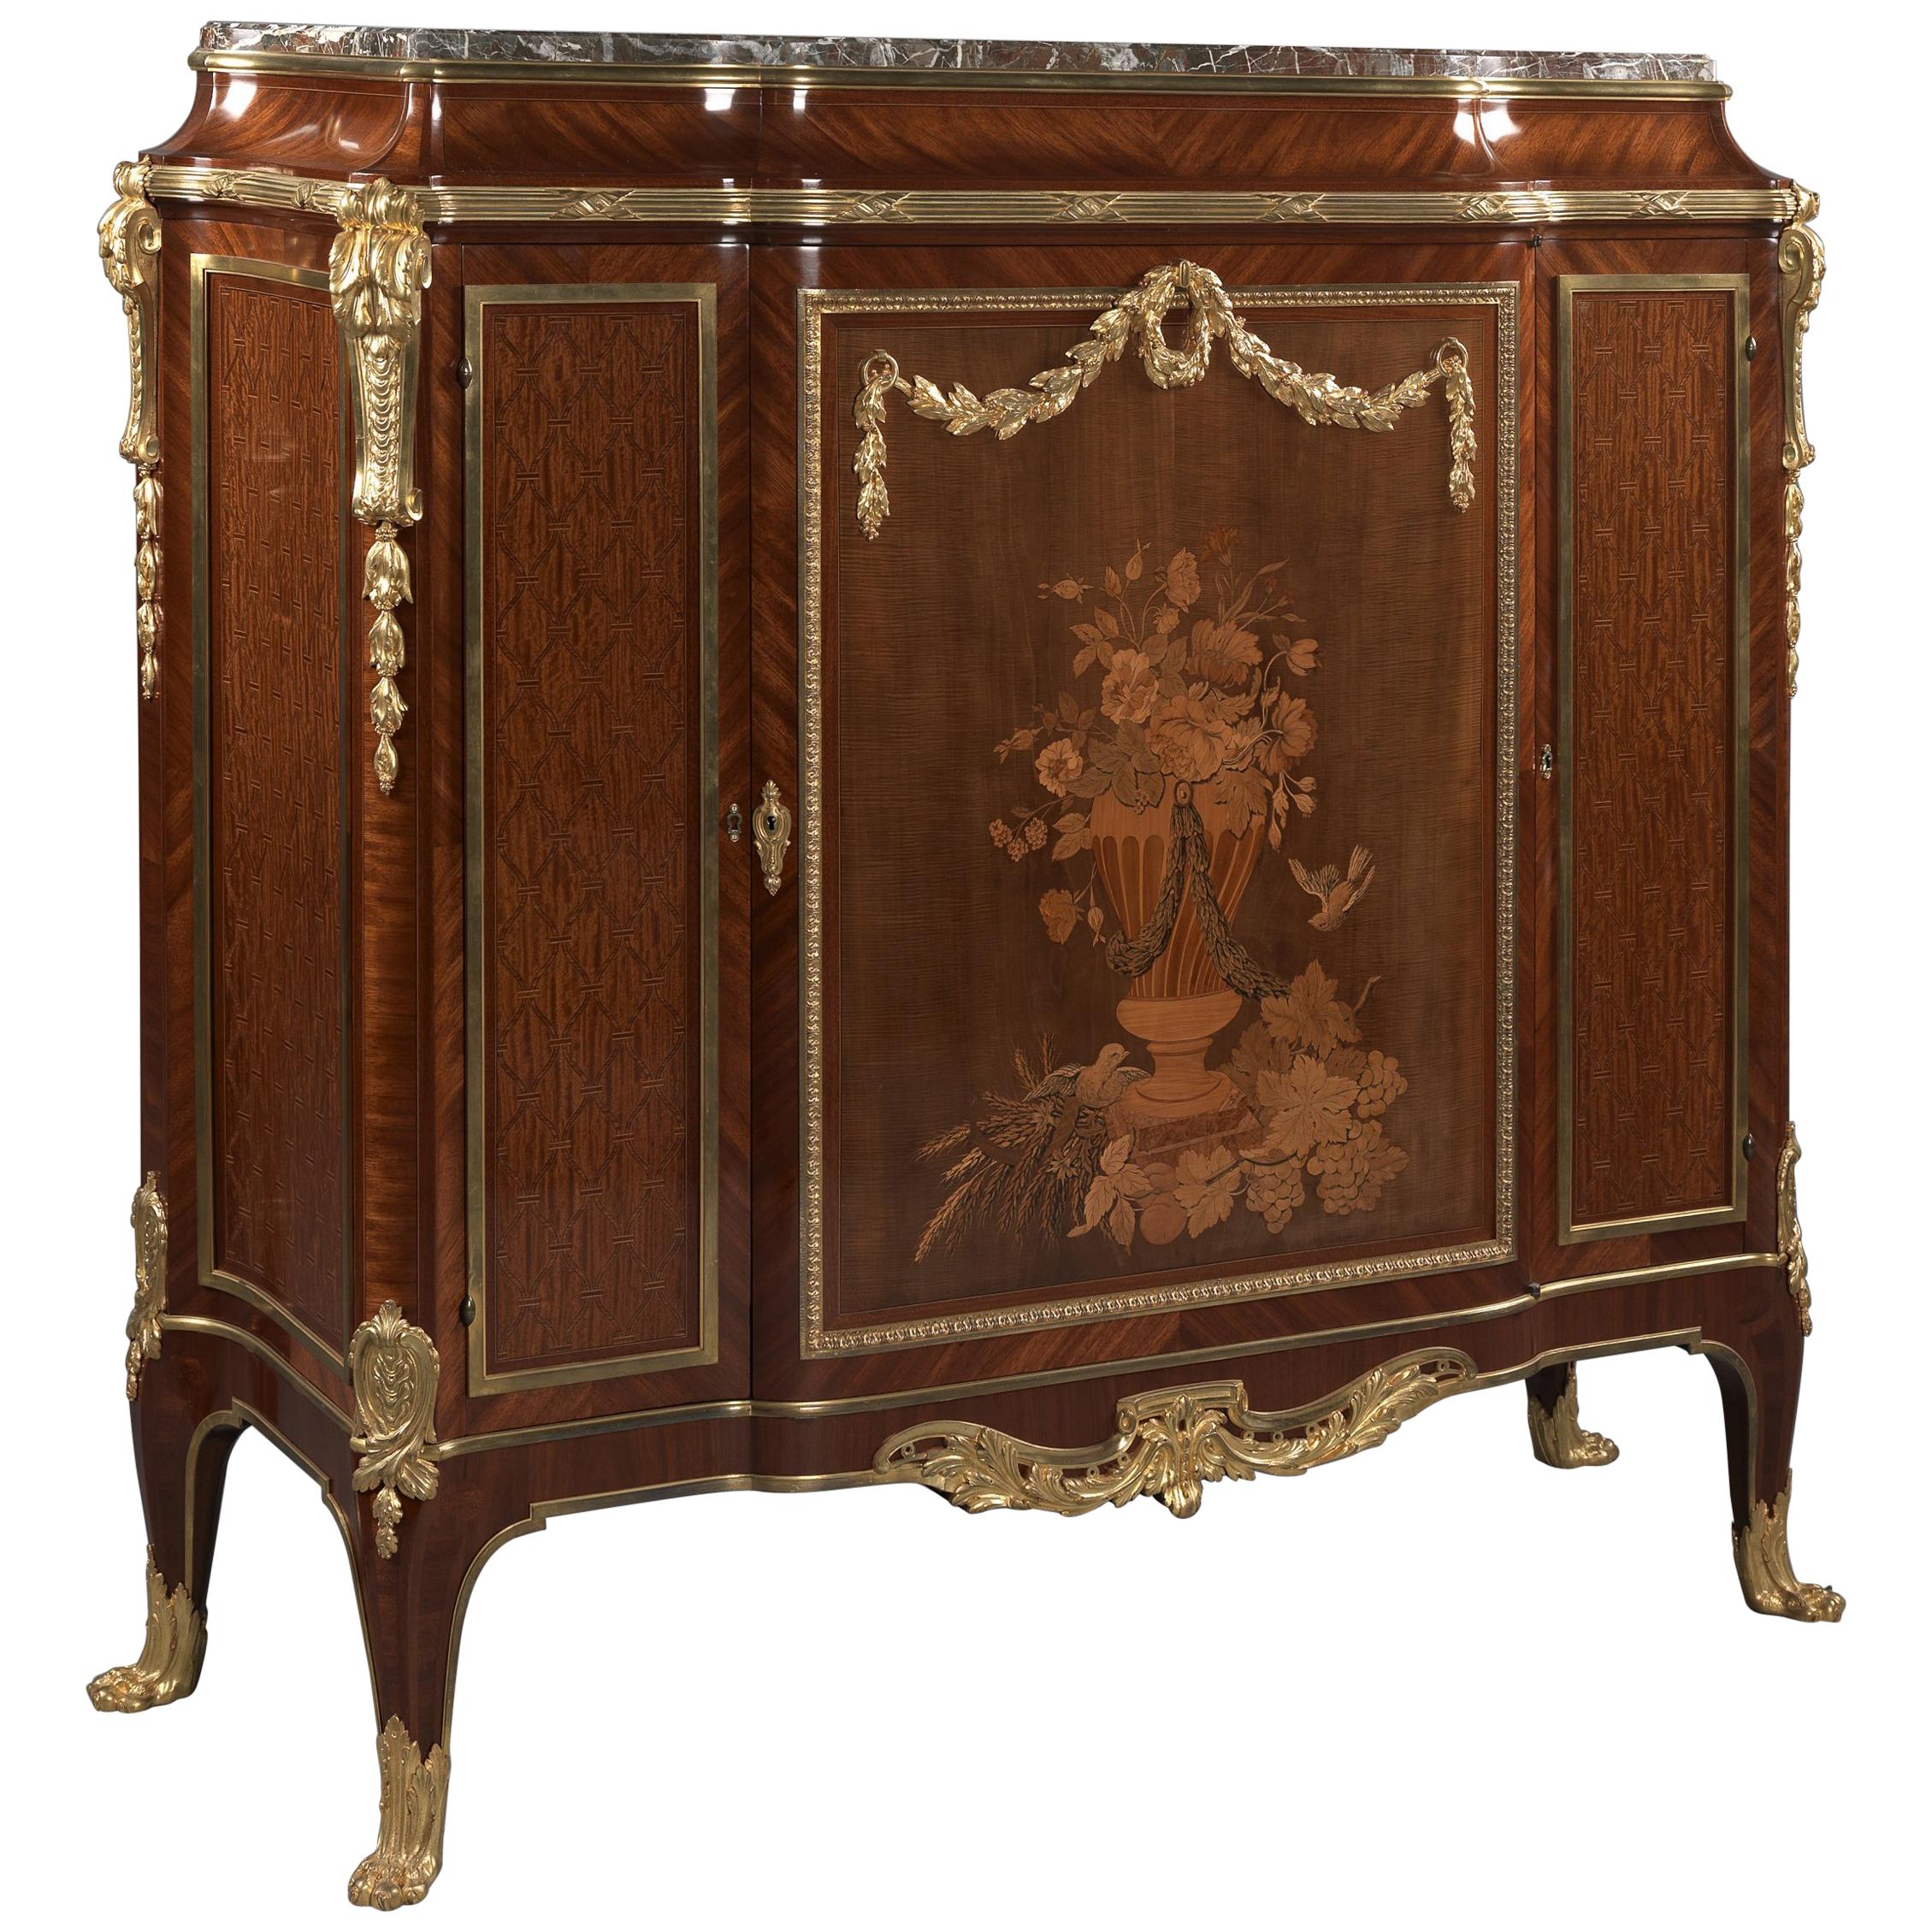 Transitional Style Marquetry-Inlaid Side Cabinet with a Marble Top, Dated 1912